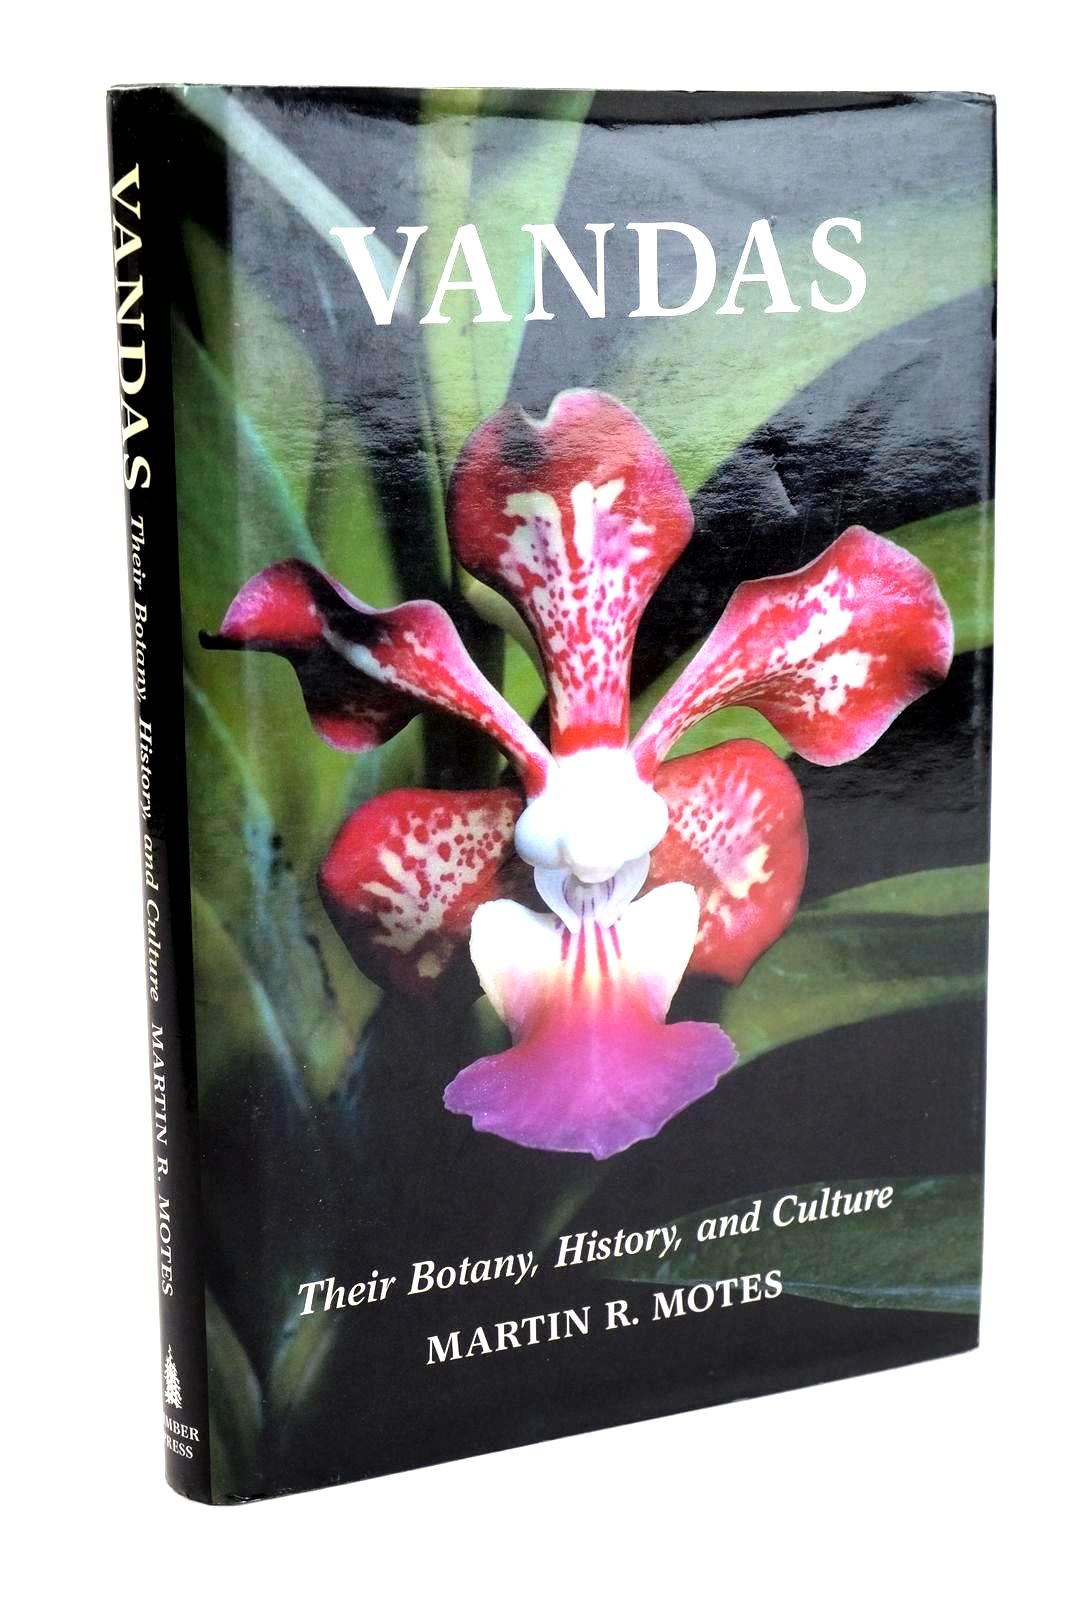 Photo of VANDAS THEIR BOTANY, HISTORY, AND CULTURE written by Motes, Martin R. published by Timber Press (STOCK CODE: 1324272)  for sale by Stella & Rose's Books